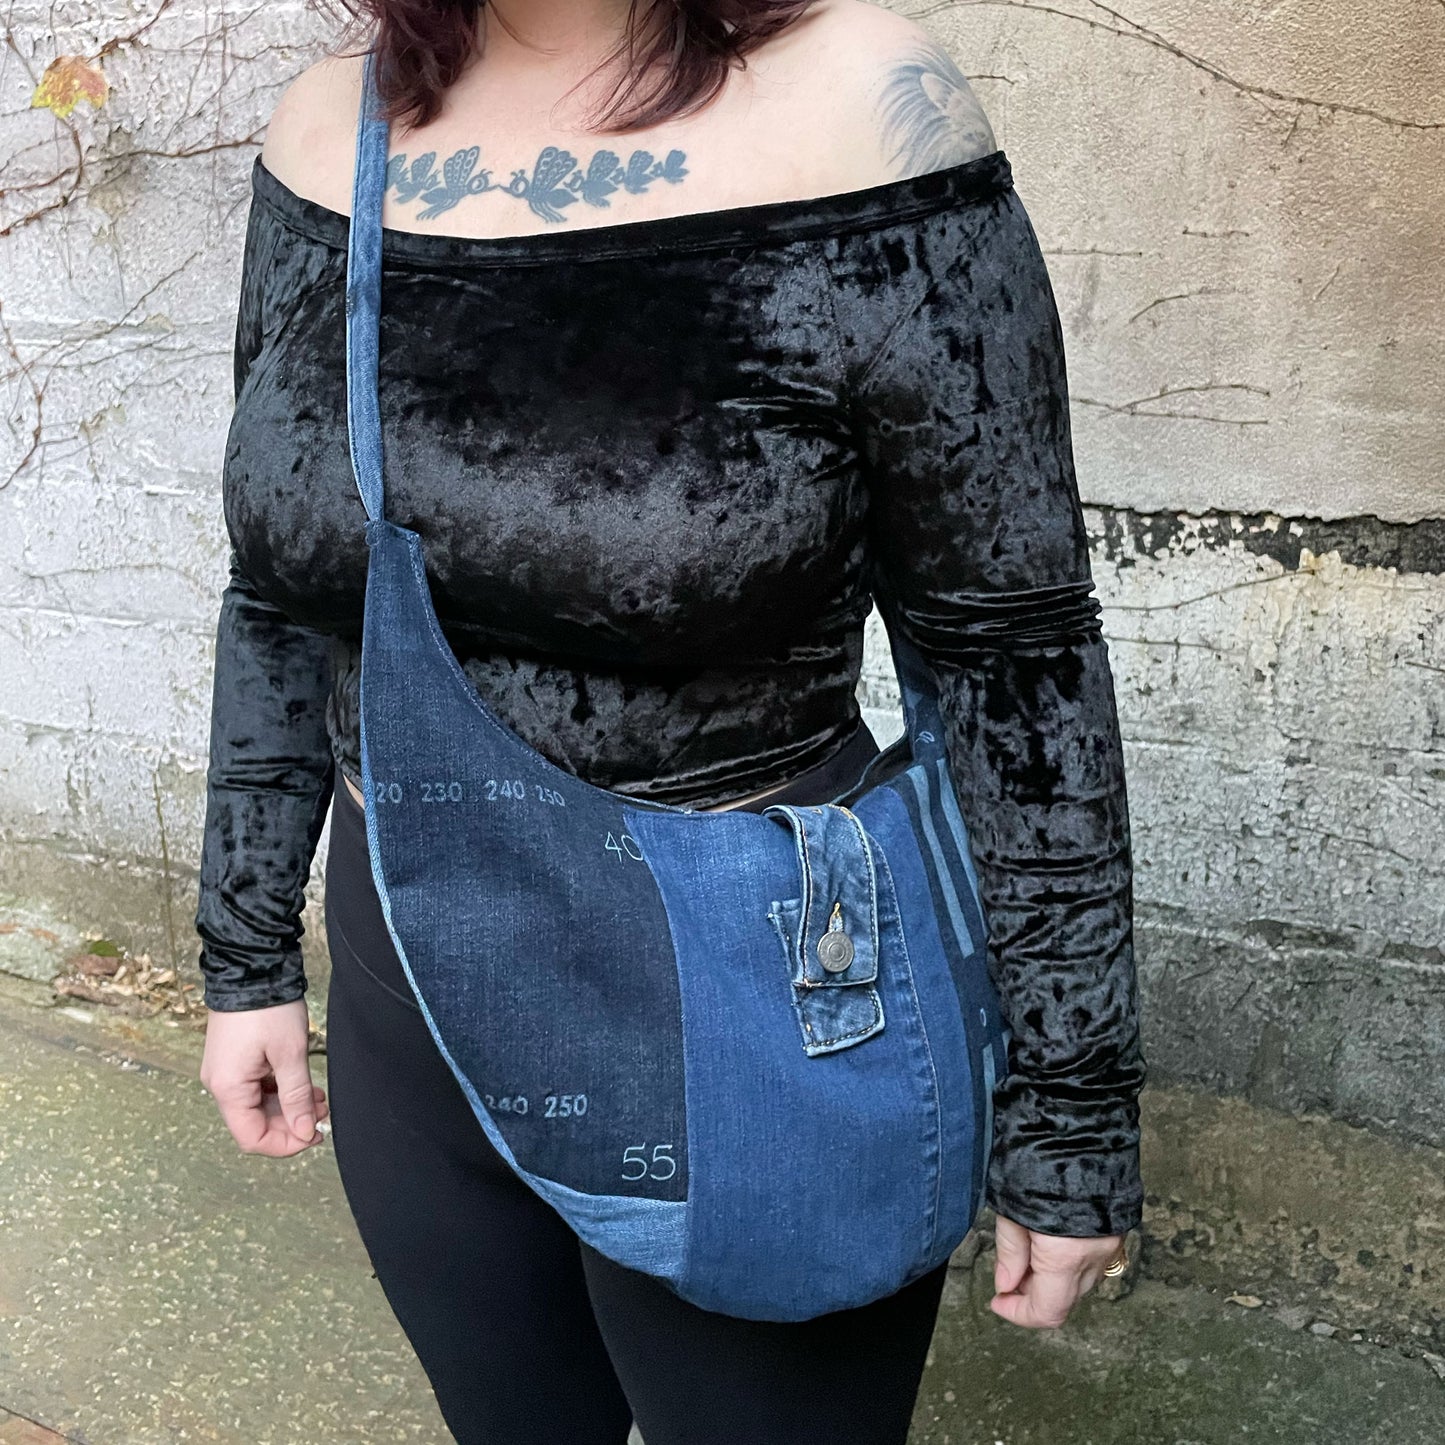 Denim Slouch bag in Indigo. handmade unique handbags, recycled denim bags, handmade genuine leather bags, completely one of a kind bags made by local brooklyn designers.